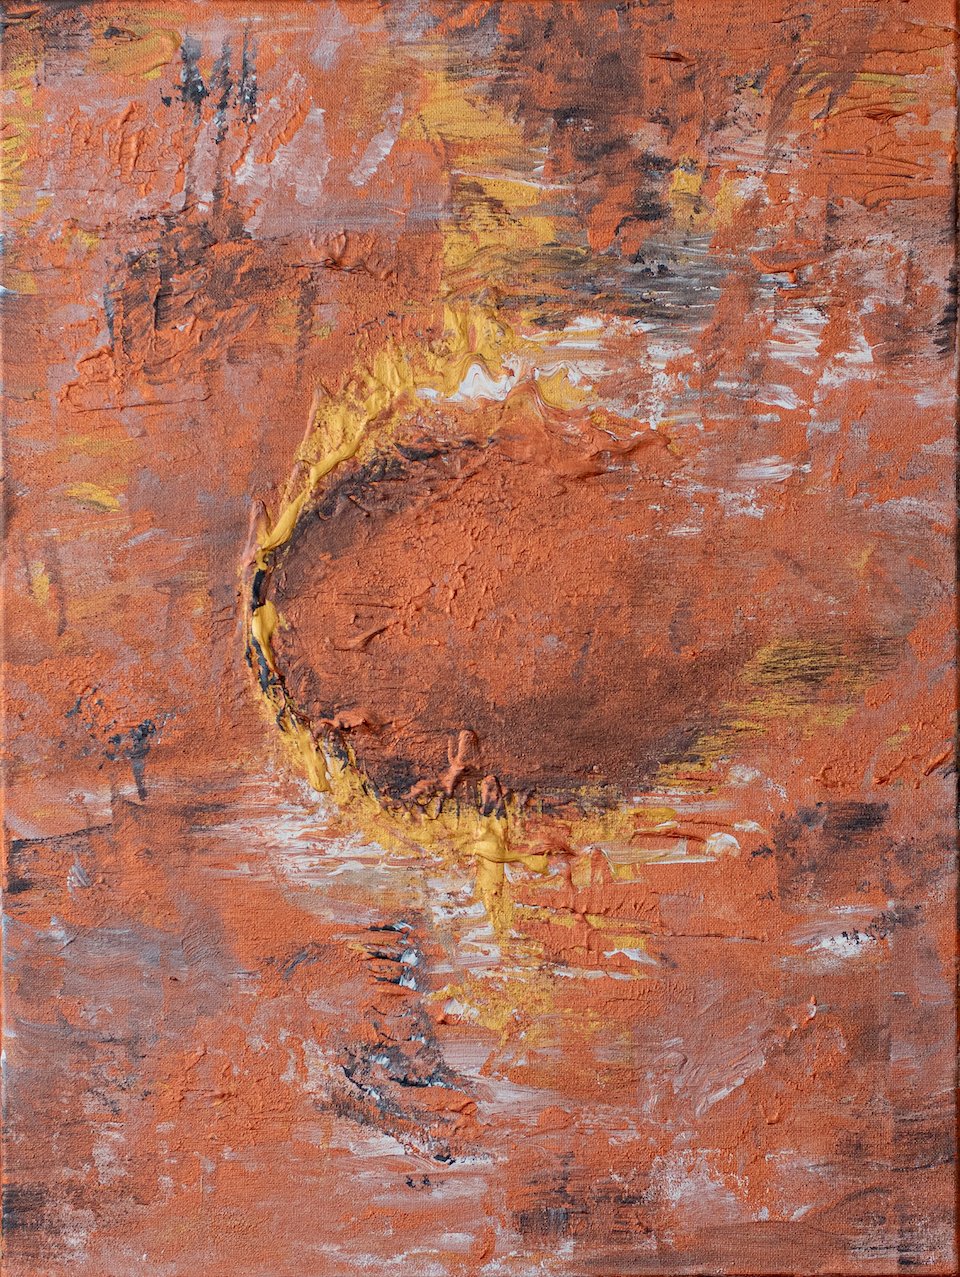 CopperPainting1-1sml.jpg